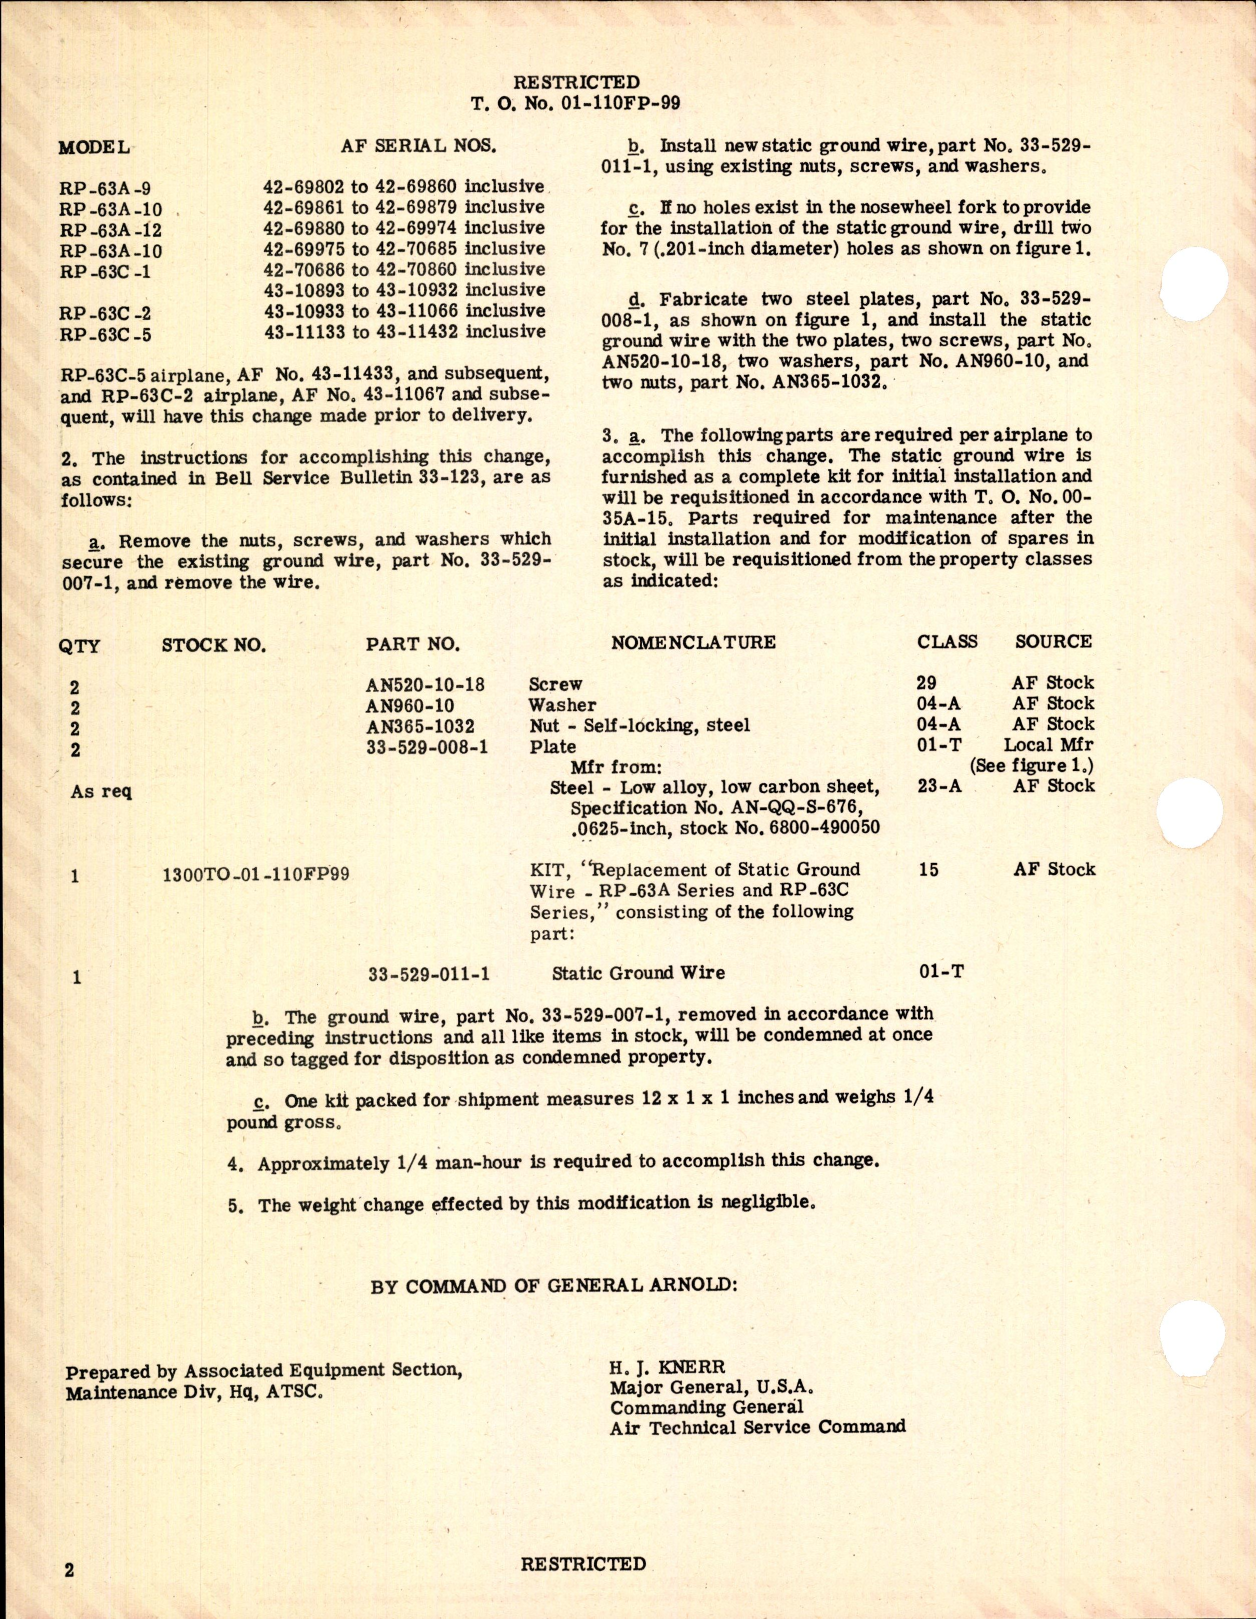 Sample page 2 from AirCorps Library document: Replacement of Static Ground Wire for RP-63